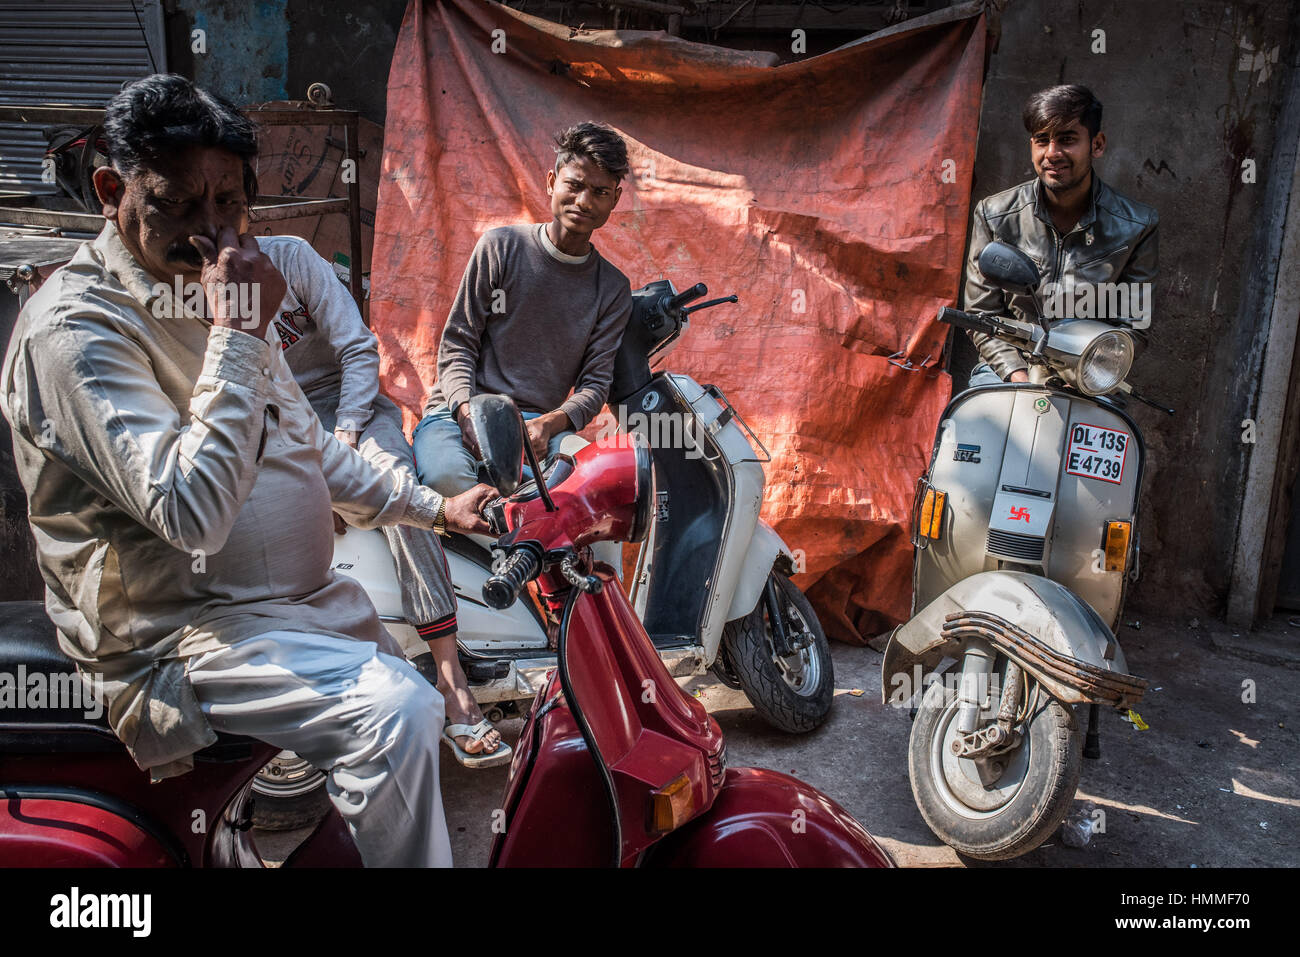 Three Indian men on motor scooters. Stock Photo